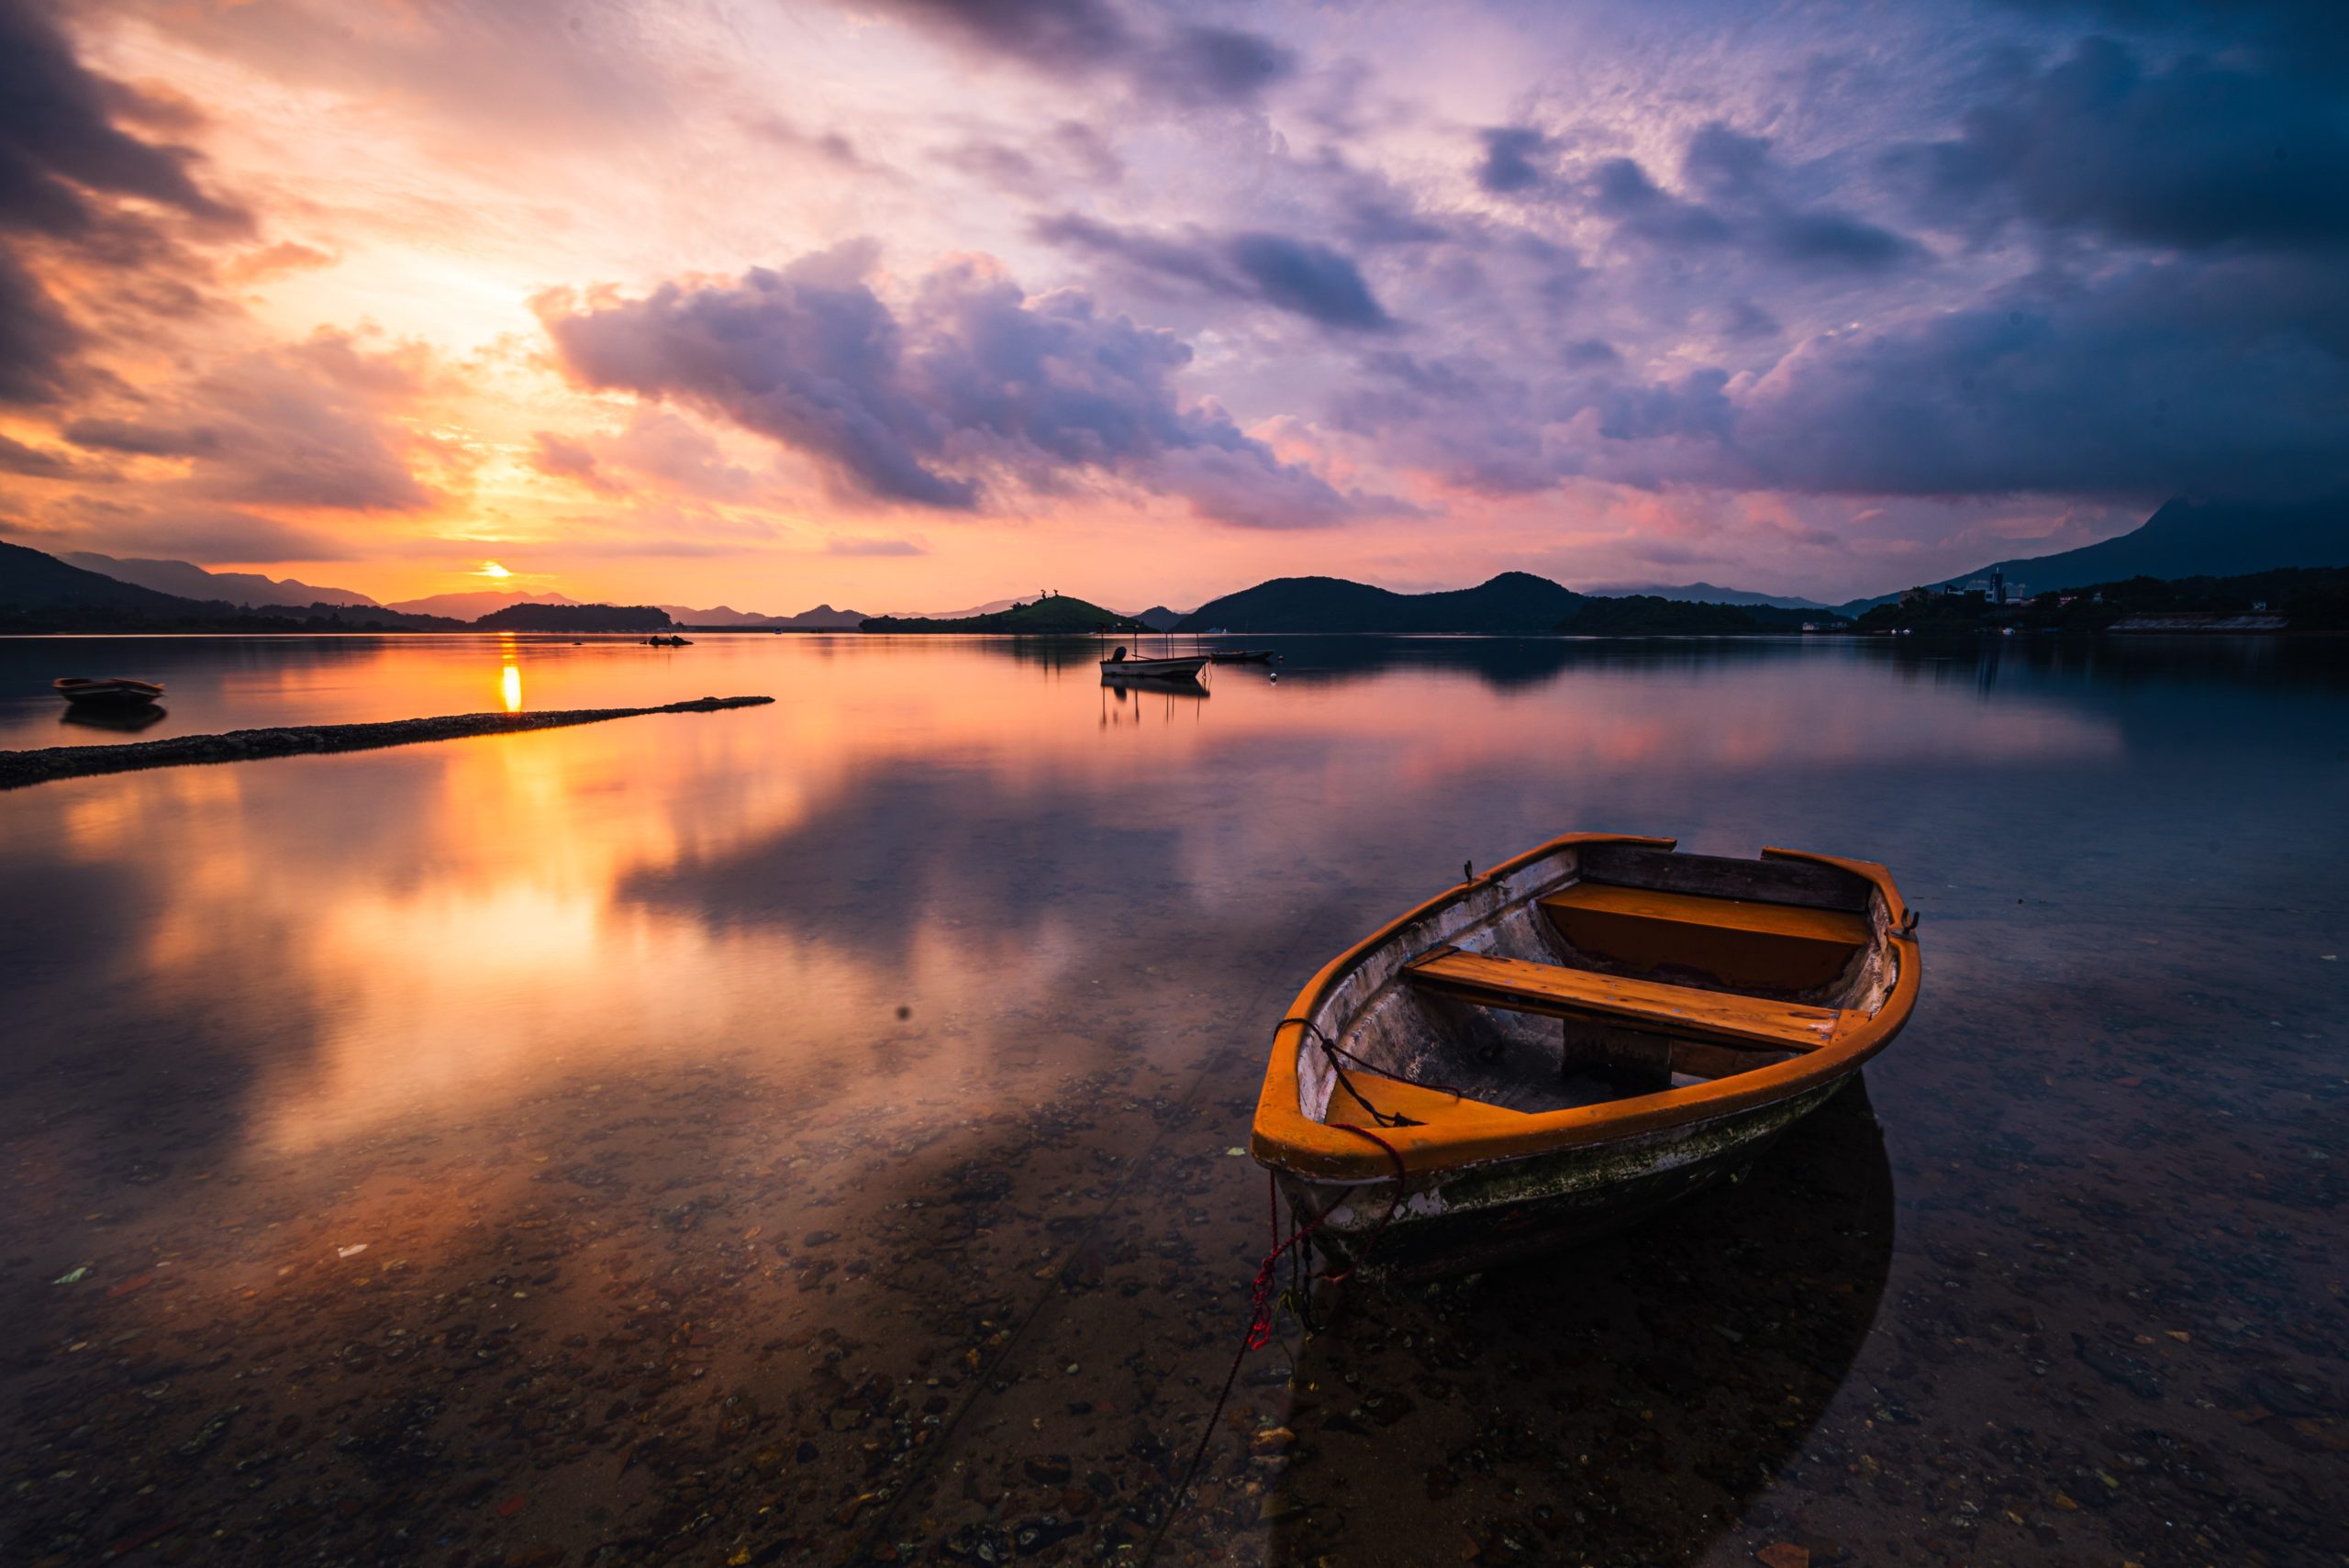 Beautiful shot of a small lake with a wooden rowboat in focus and breathtaking clouds in the sky>